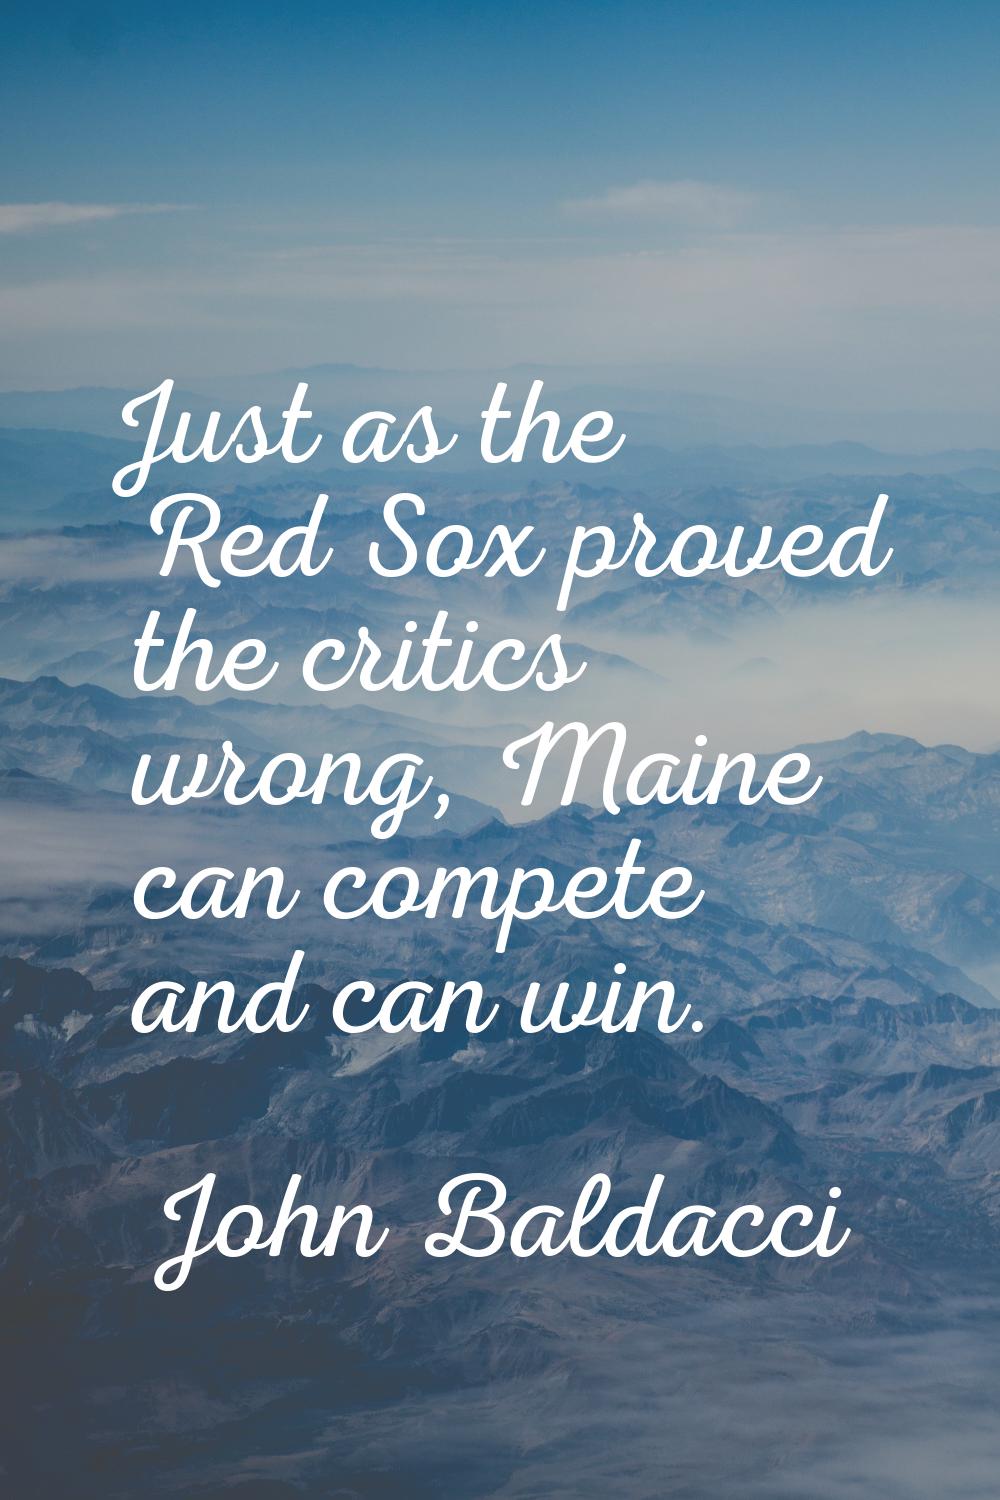 Just as the Red Sox proved the critics wrong, Maine can compete and can win.